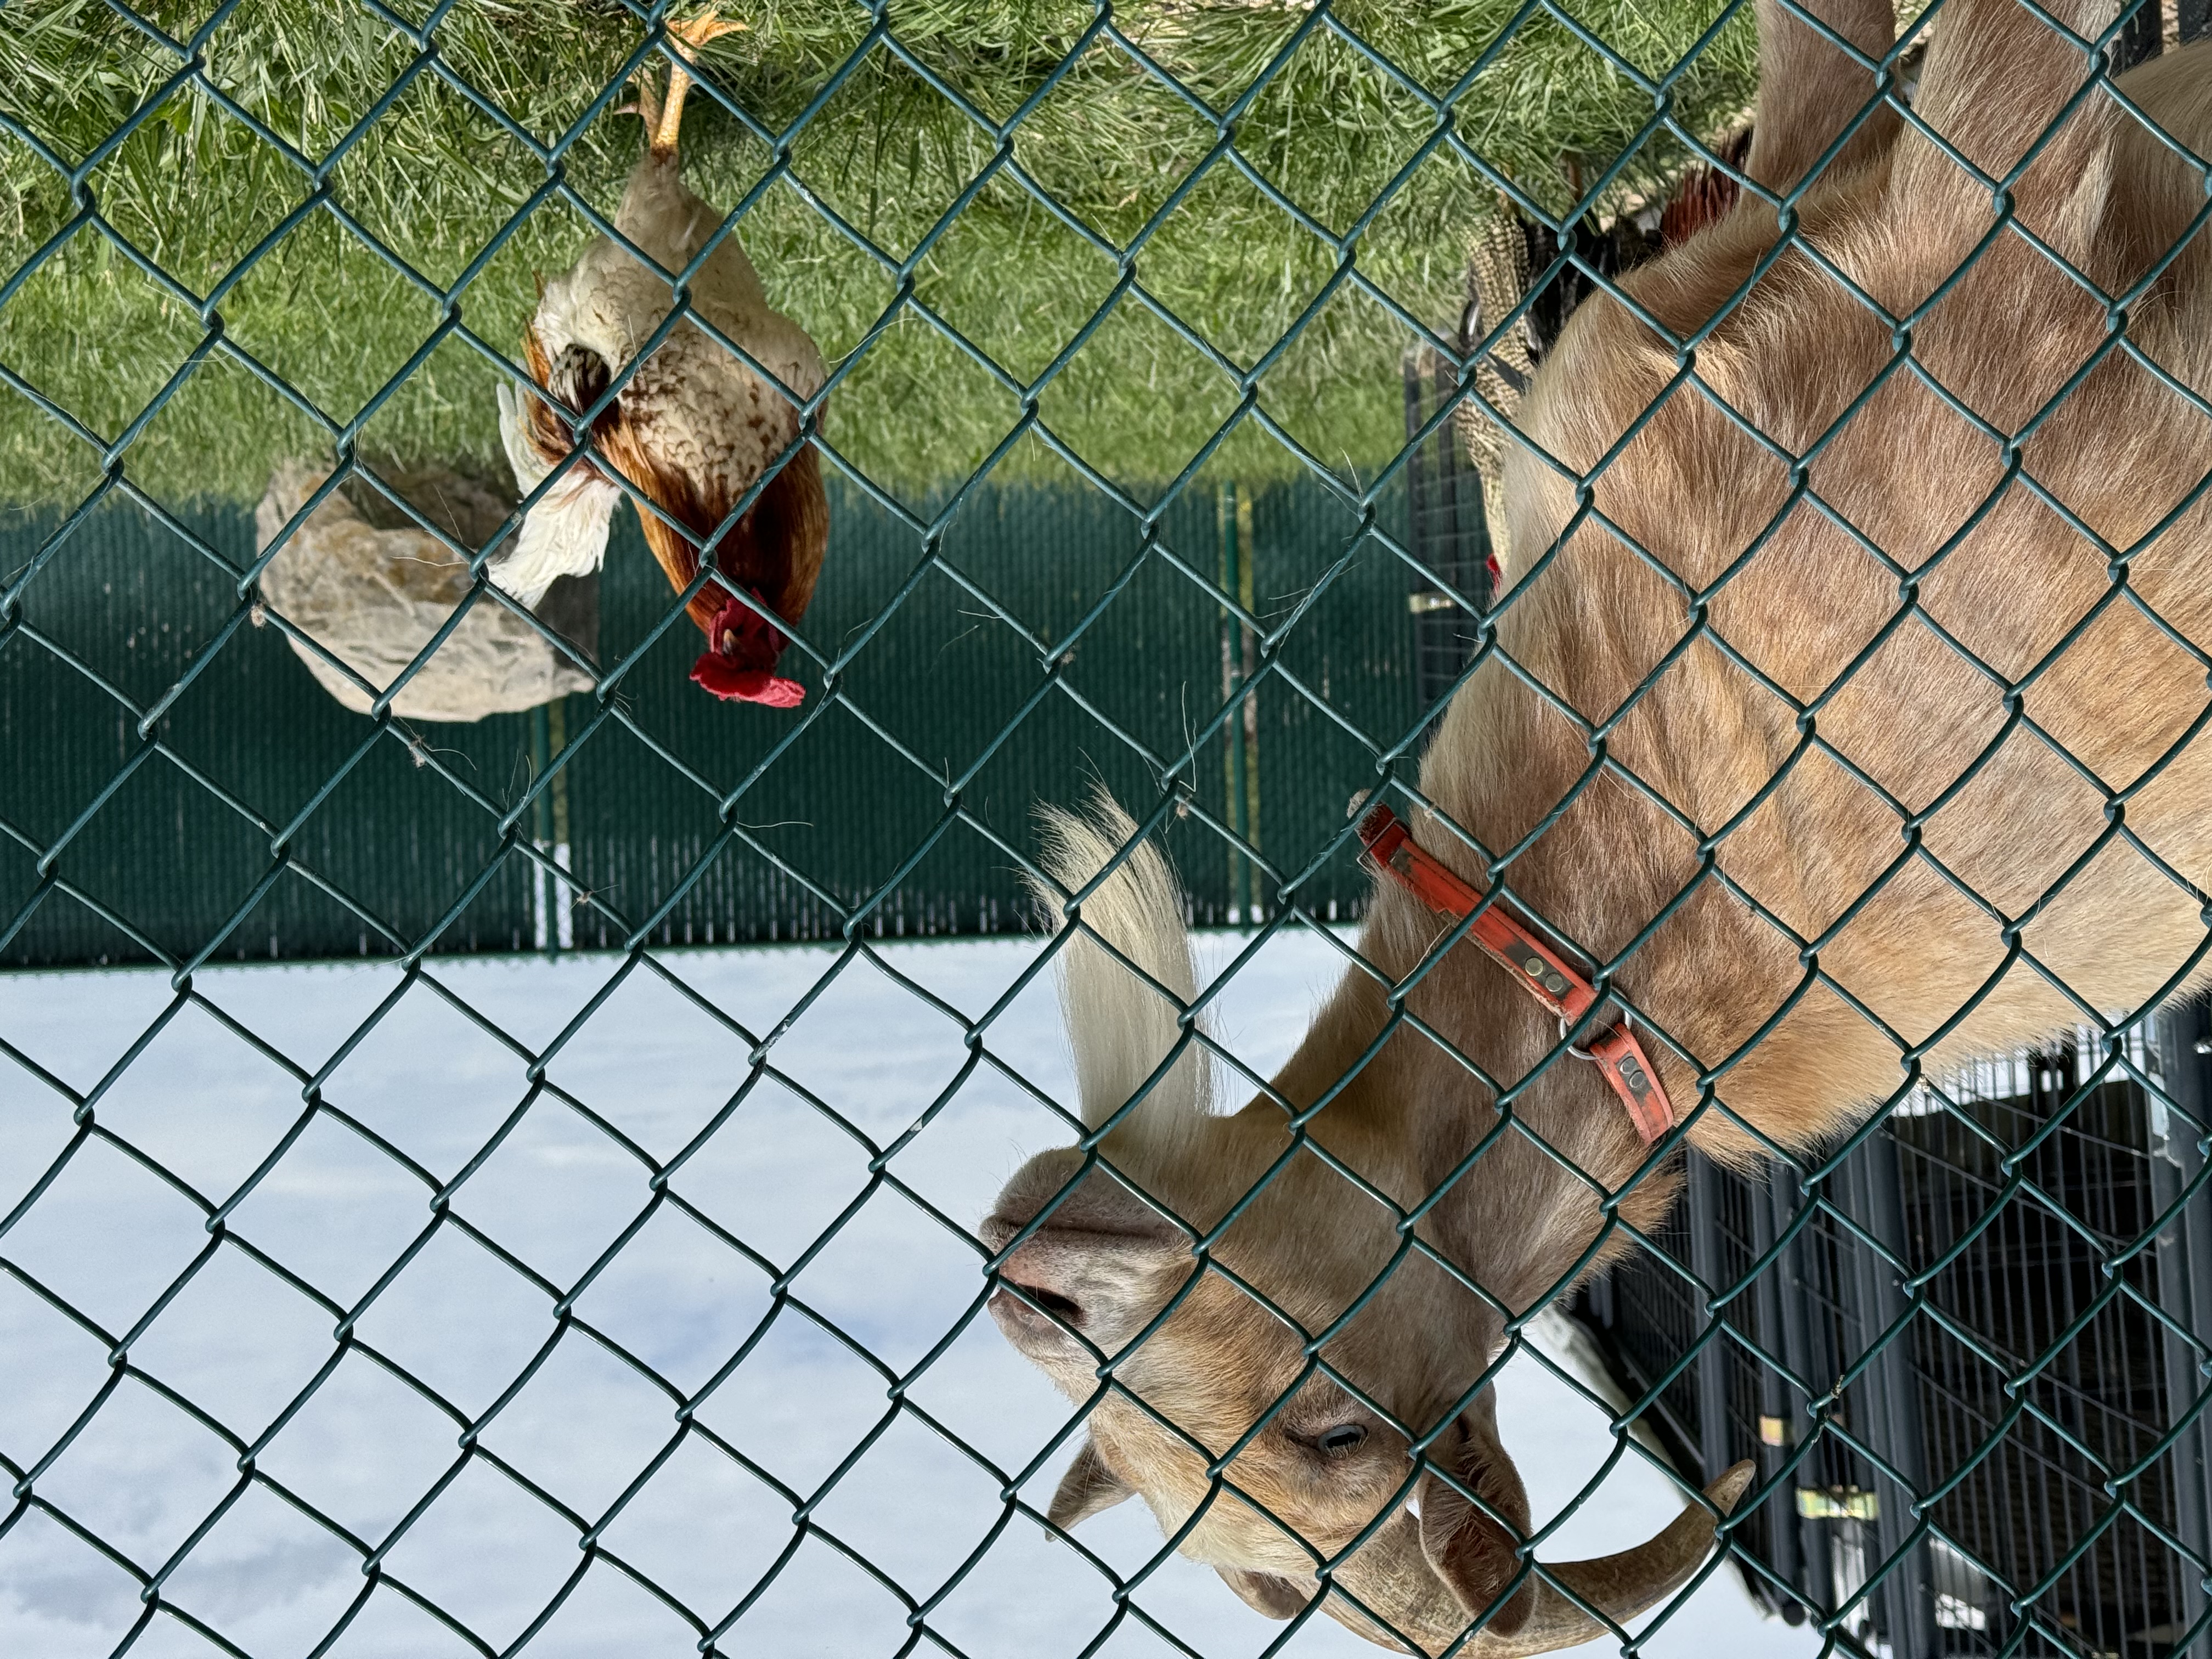 a goat and chicken behind a fence